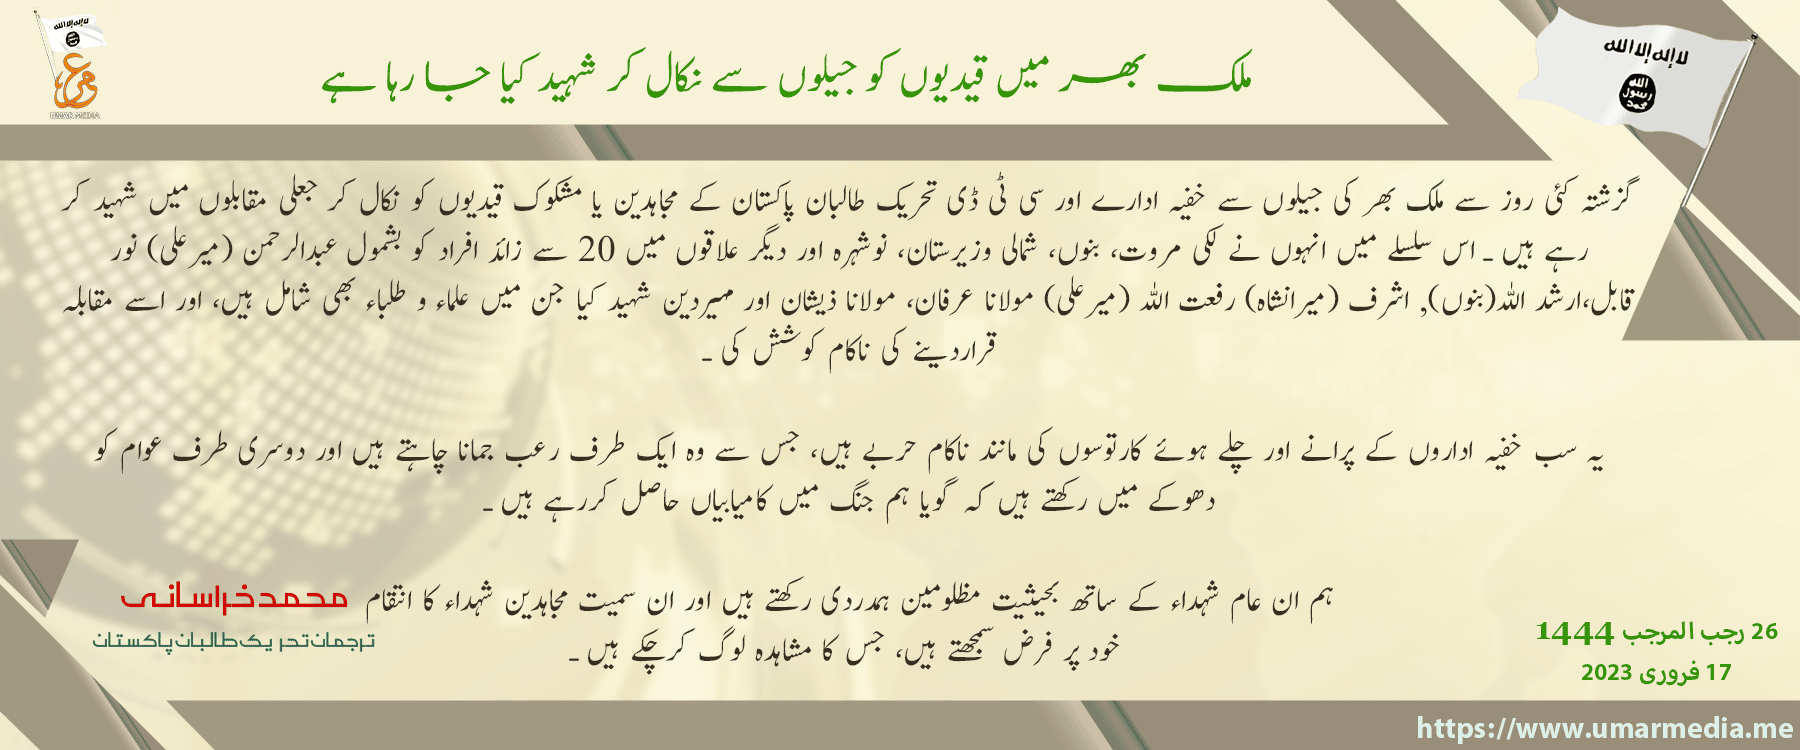 (Statement) Tehreek-e-Taliban Pakistan (TTP) Militants Accuse the Pakistani Government of Taking TTP Prisoners Out & Martyring them in Fake 'Encounters', Pakistan - 17 February 2023